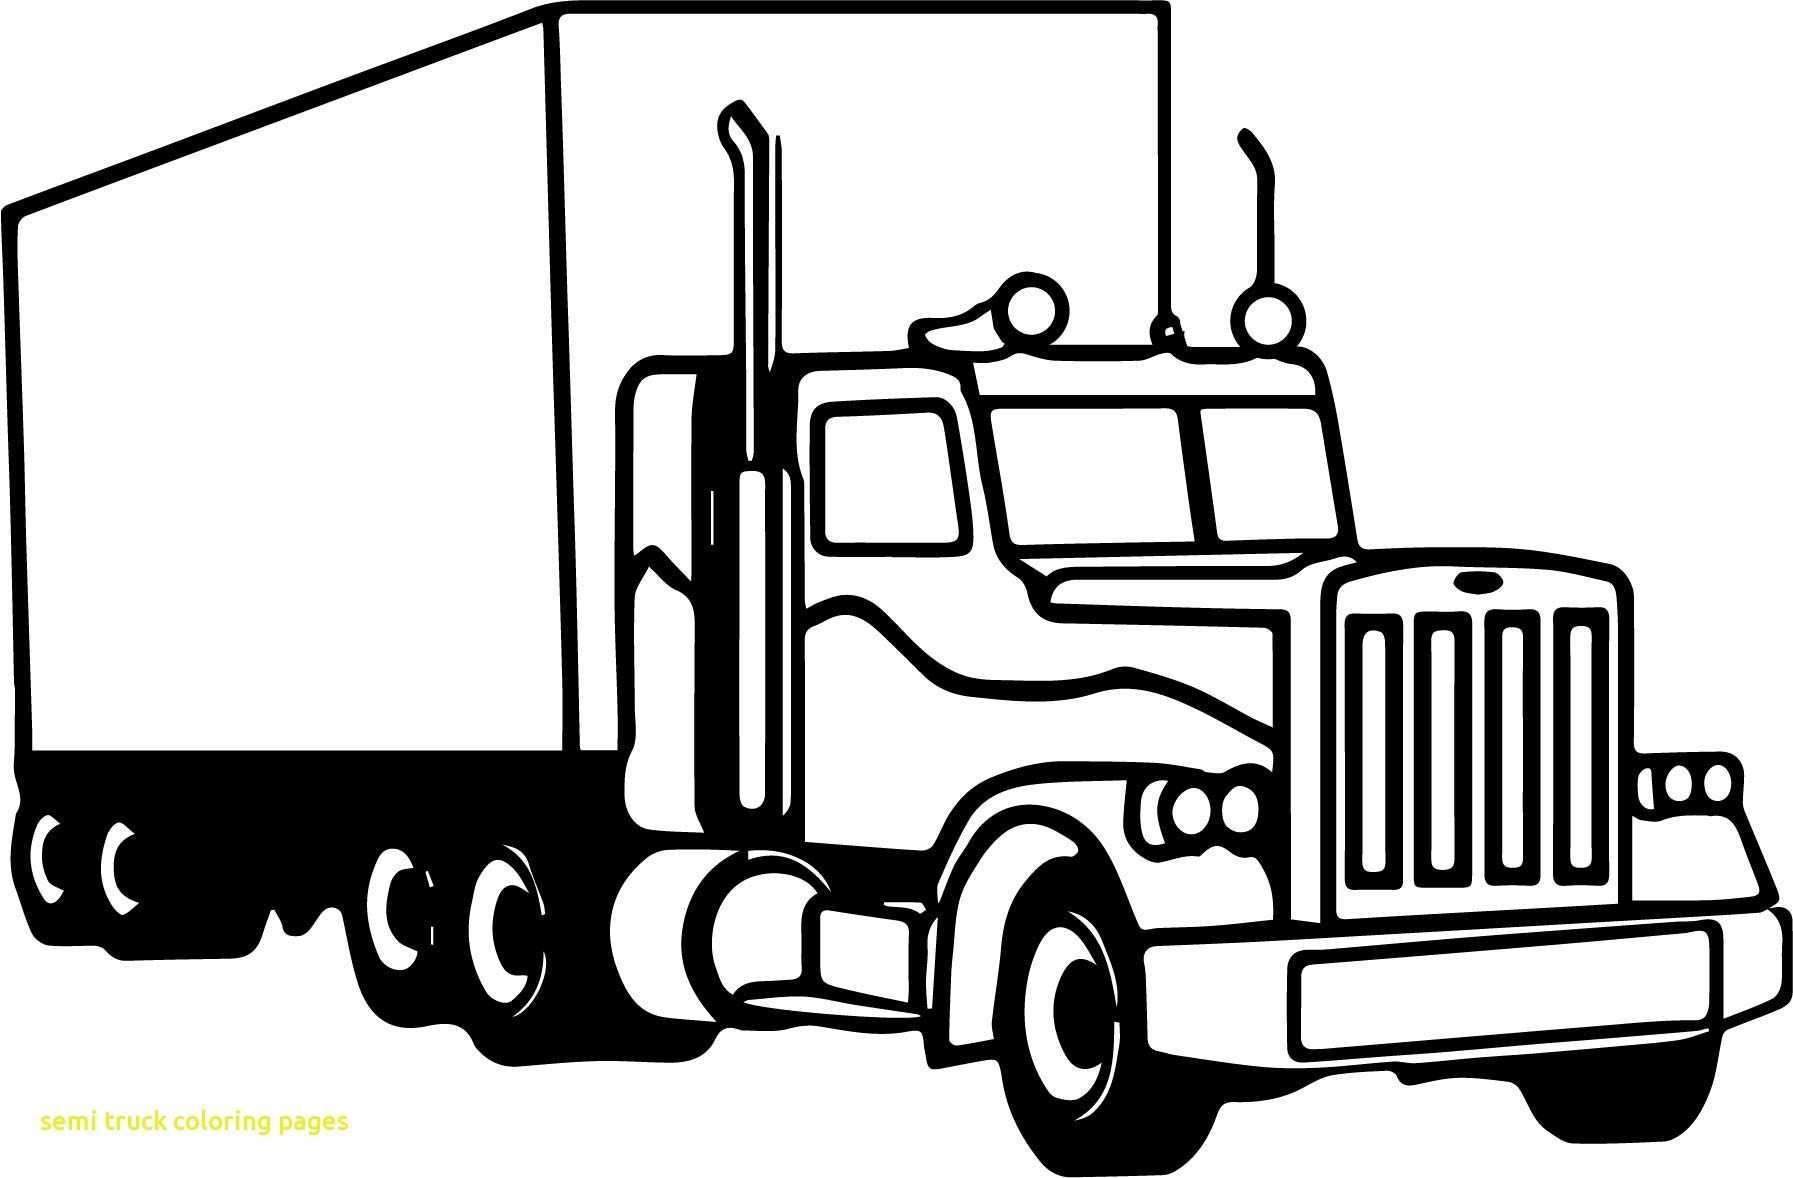 Semi truck coloring pages semi truck coloring pages elegant coloring book and pages blaze